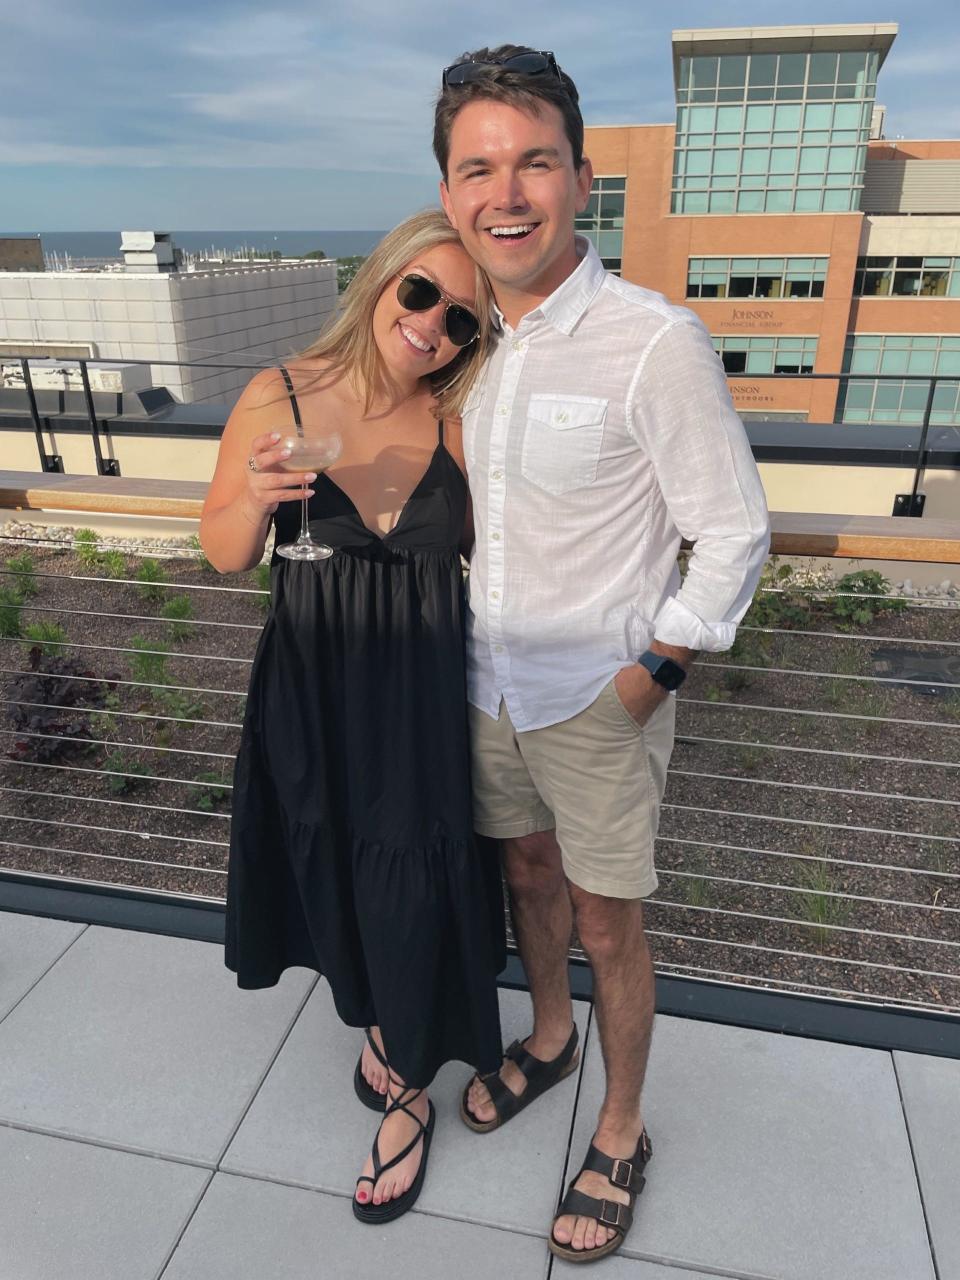 Former "Farmer Wants a Wife" star and Caledonia resident Grace Girard is dating Trevor Jung, the transit and mobility director for the City of Racine and a Wisconsin Democratic National Convention delegate.